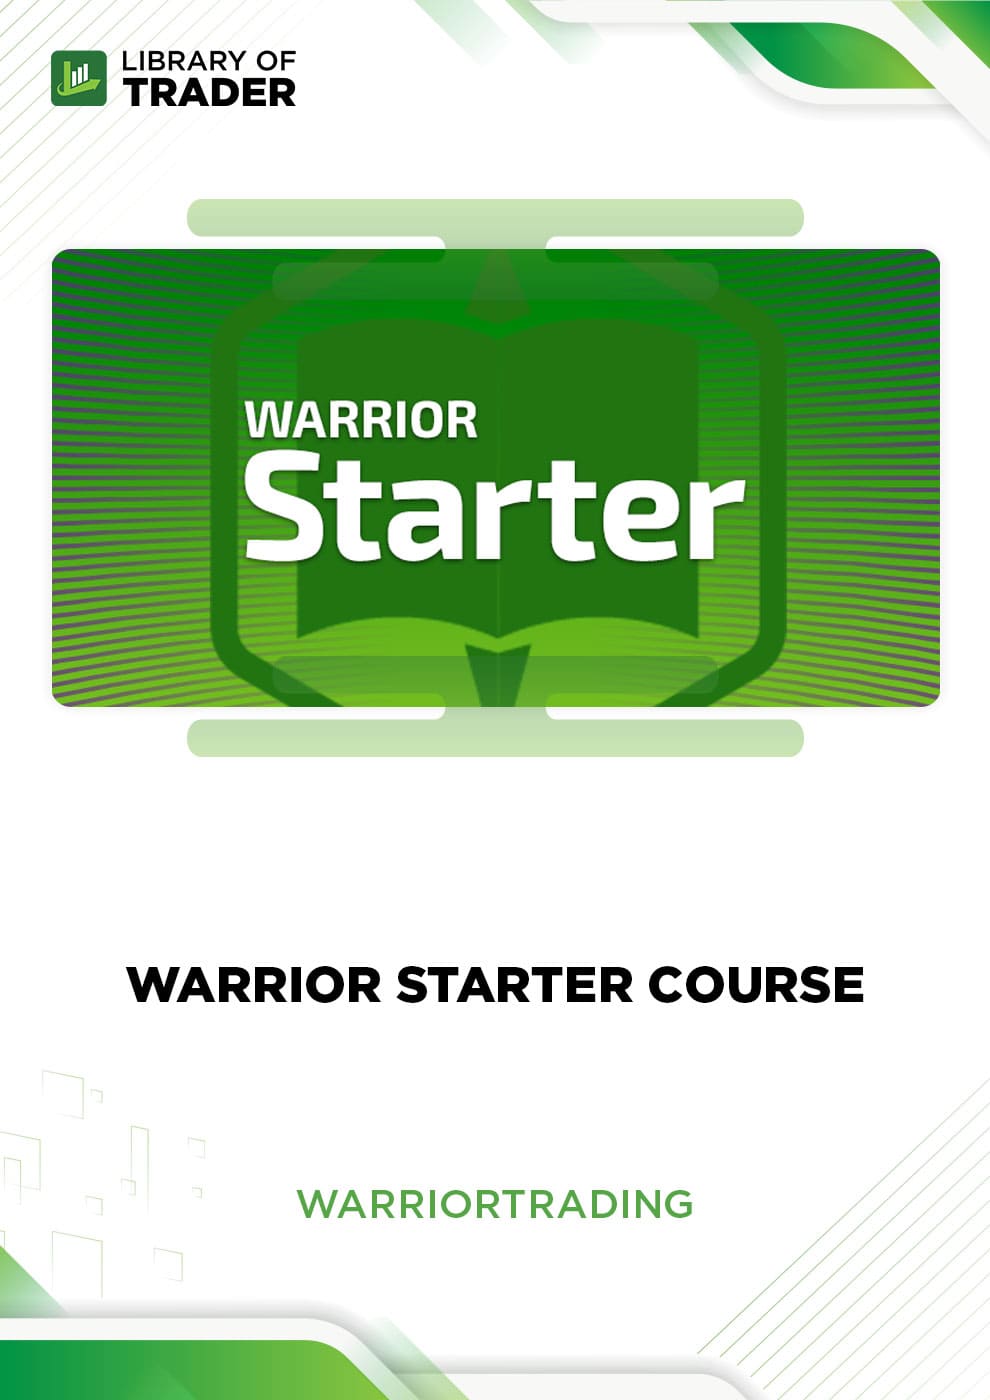 Warrior Starter Course Warrior Trading Library of Trader